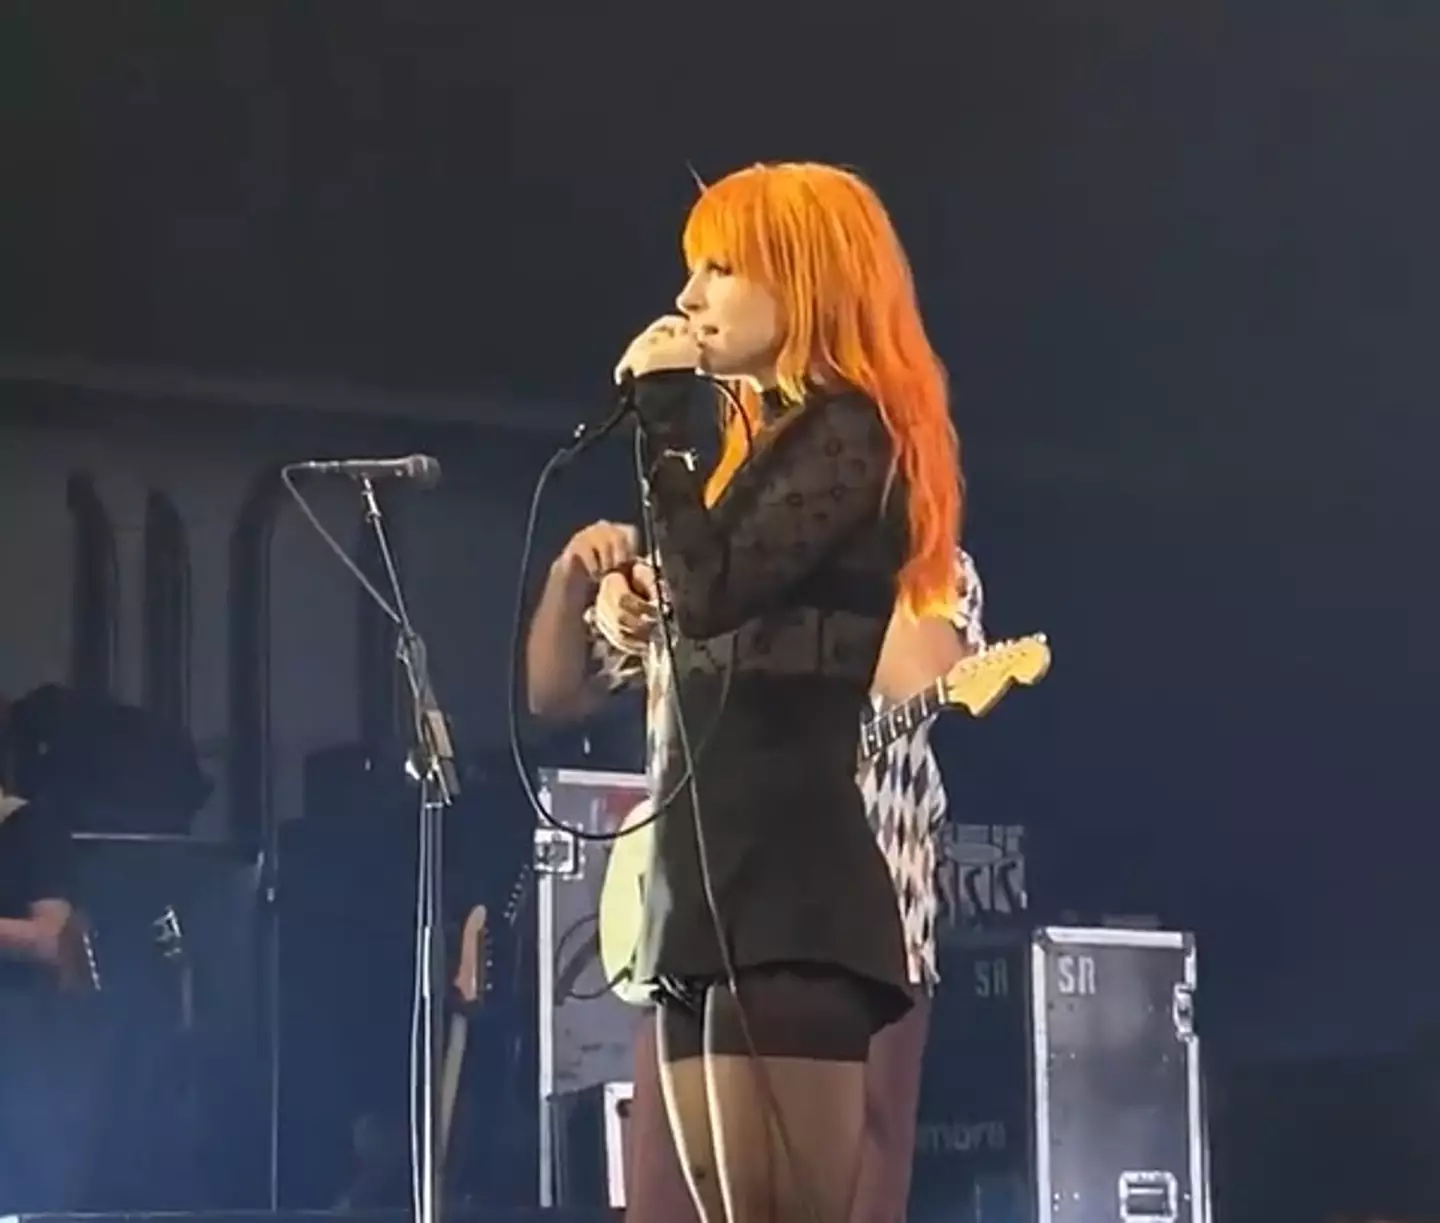 Paramore's Hayley Williams stopped a performance to break up a fight.